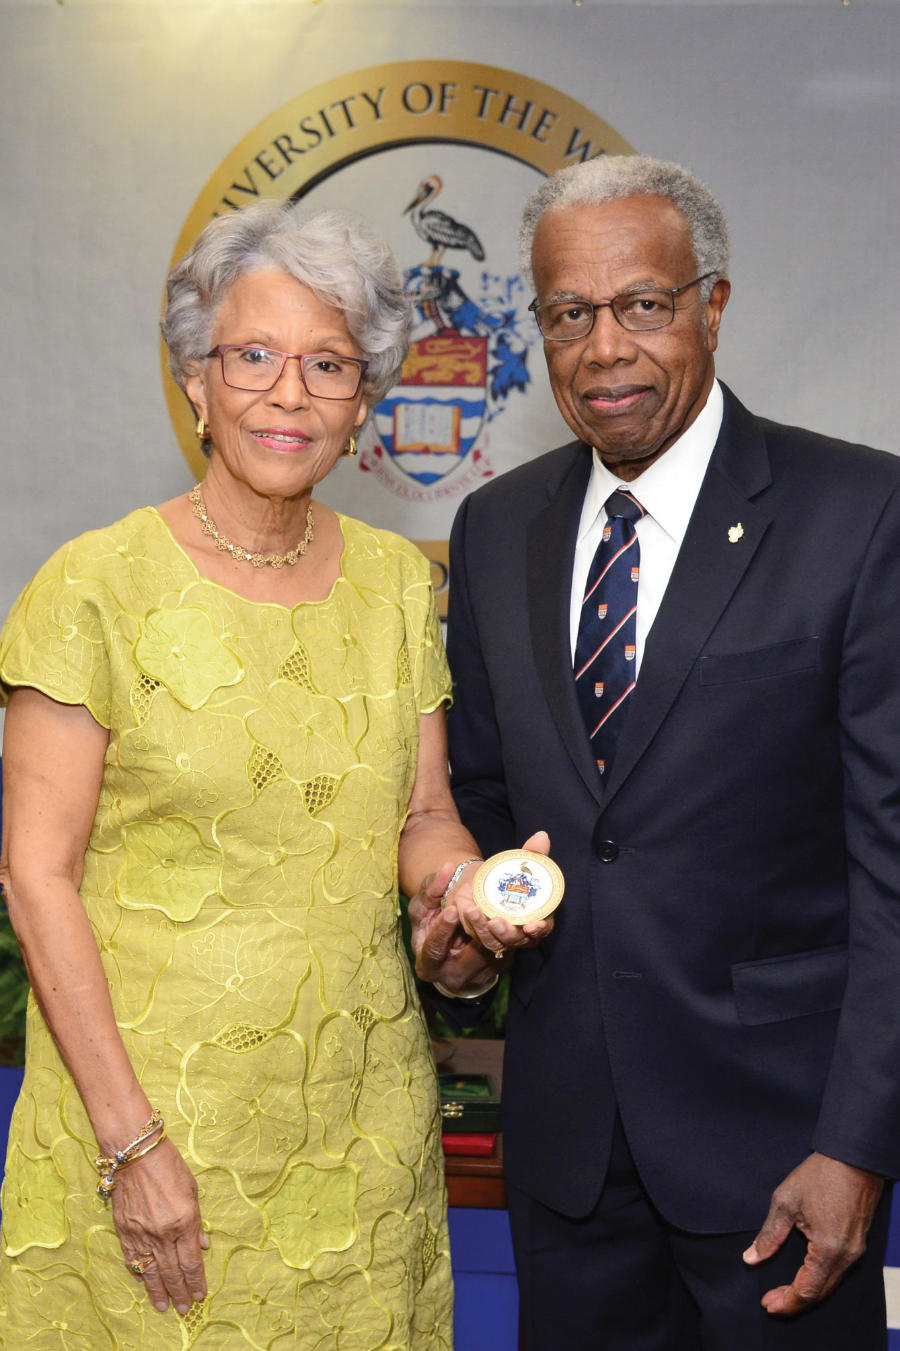 Former UWI Chancellor, Sir George Alleyne presents the Chancellor's Medal to Professor Emerita Elsa Leo-Rhynie at a ceremony at the University's Regional Headquarters on Friday, June 23, 2017.